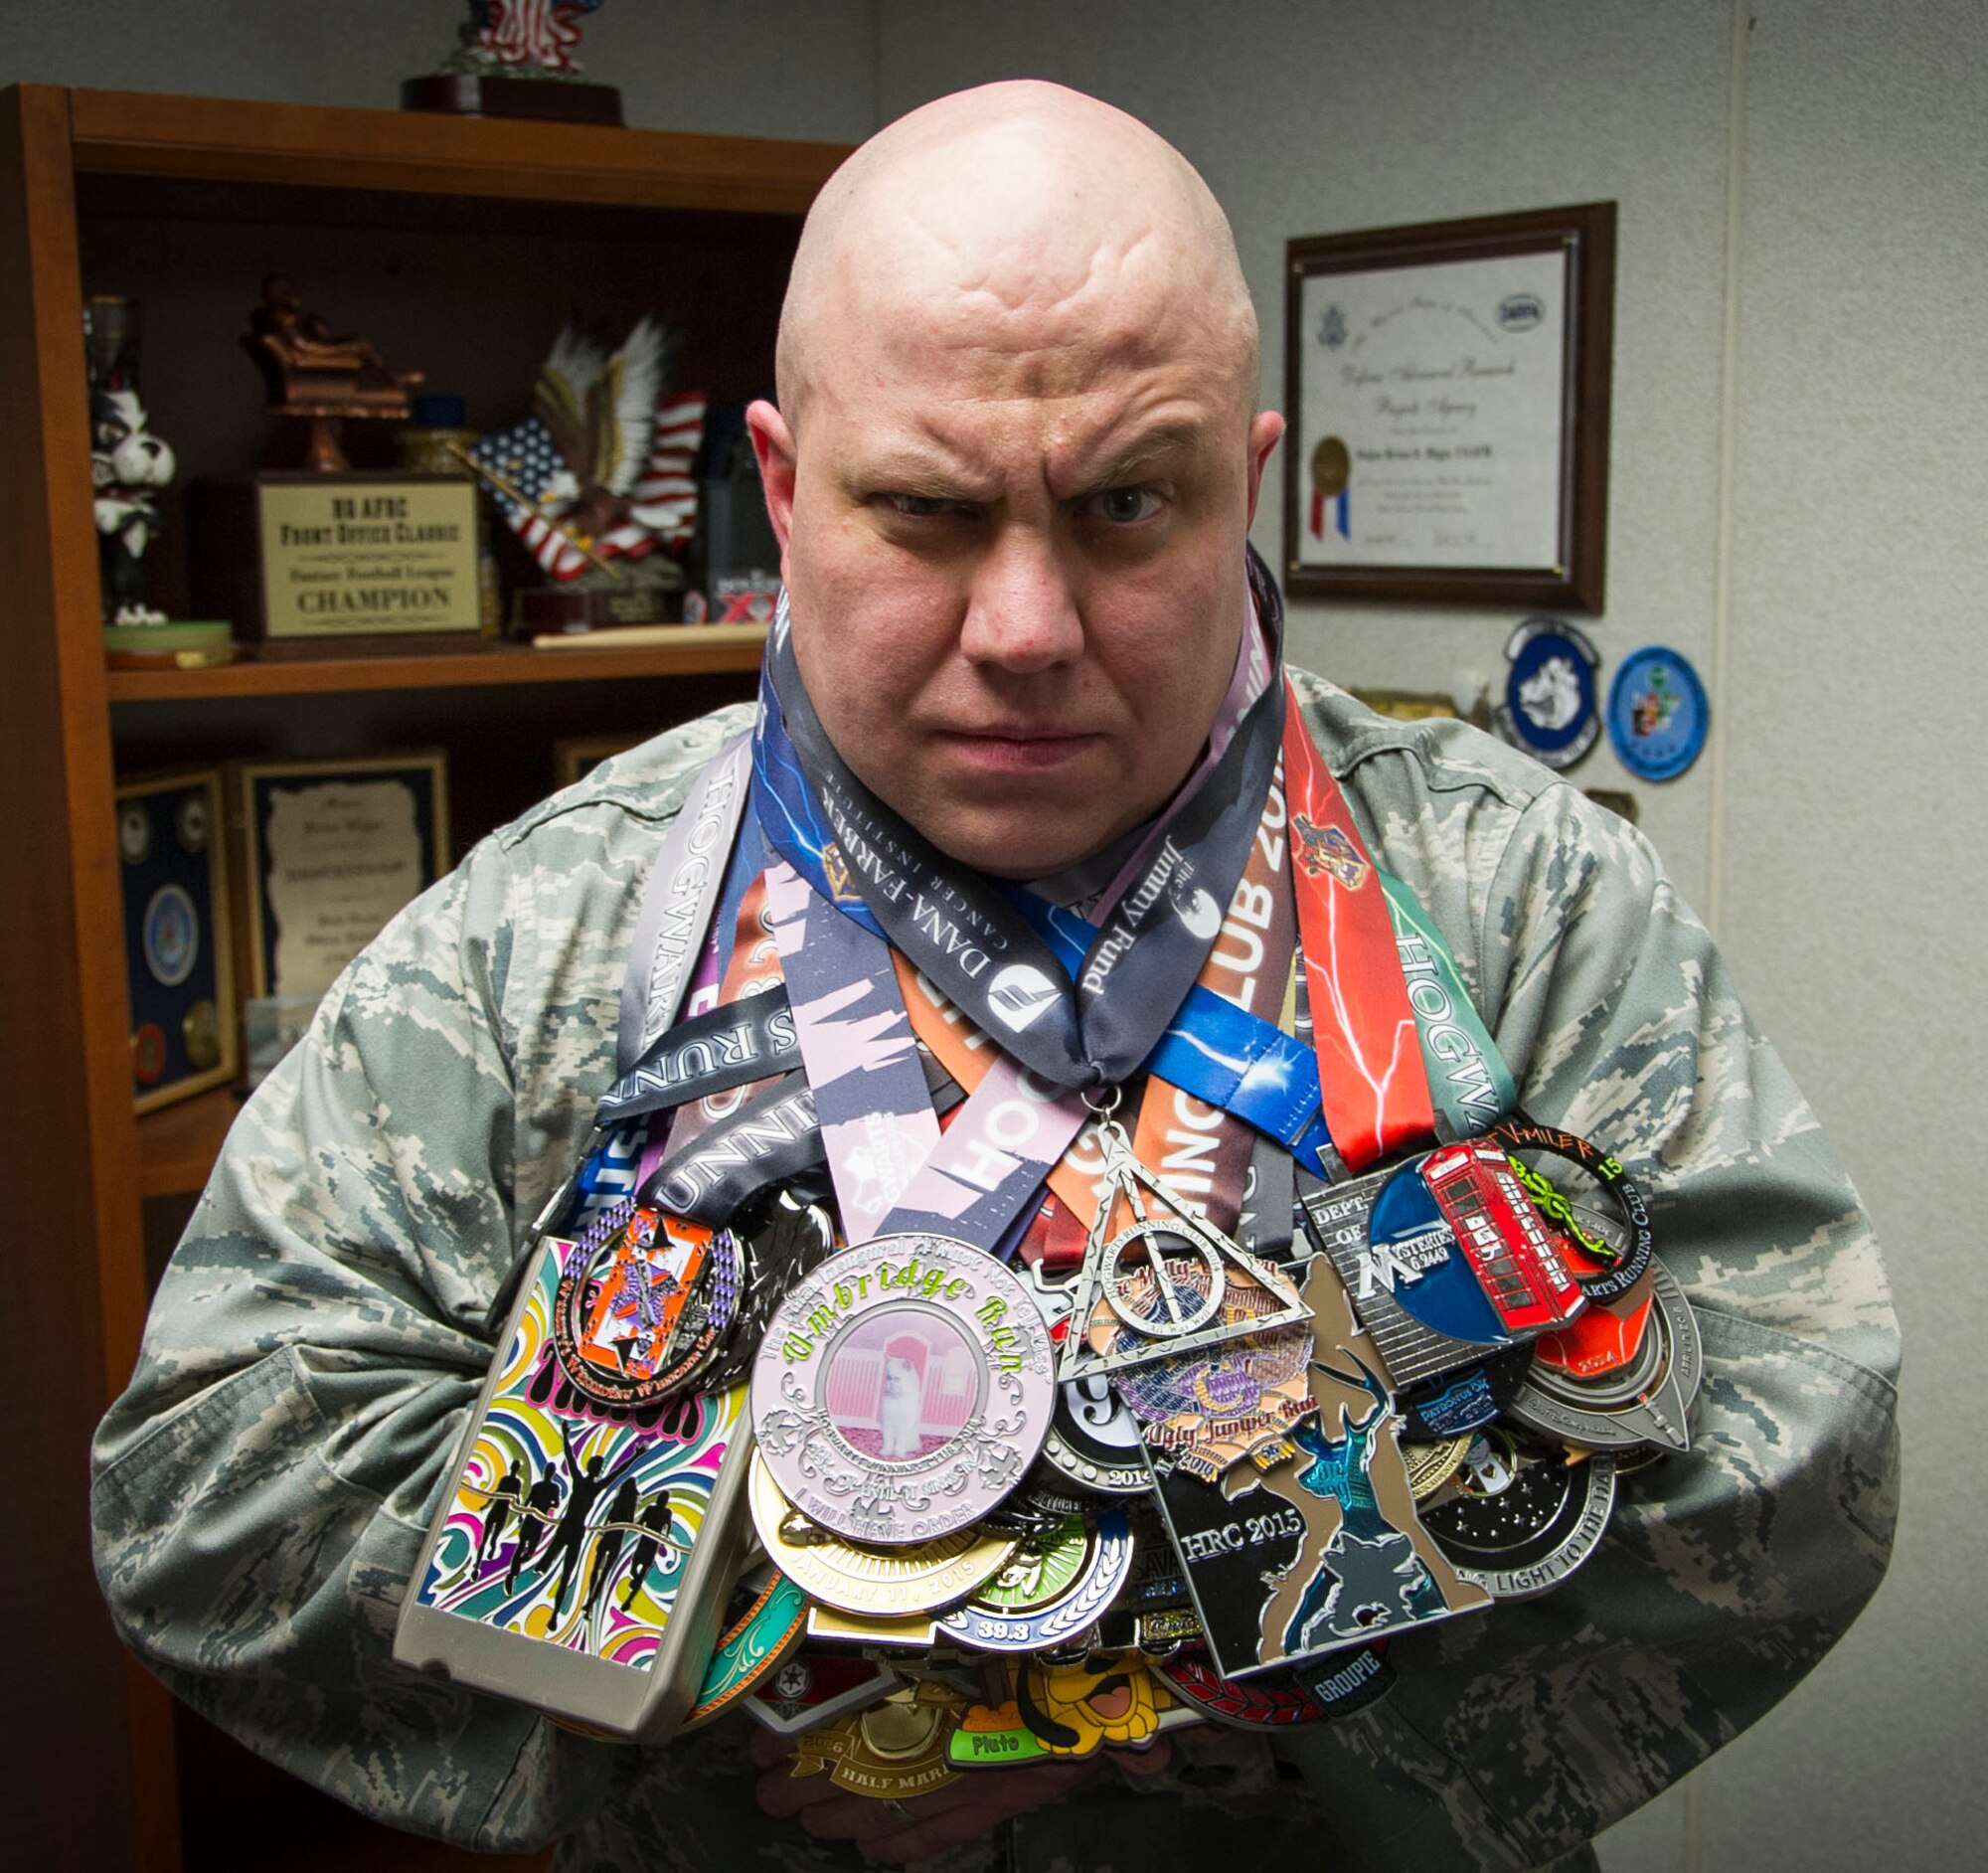 Lt. Col. Brian Biggs displays all of the medals he has received from participating in various running events throughout the country. (Matt Ebarb)